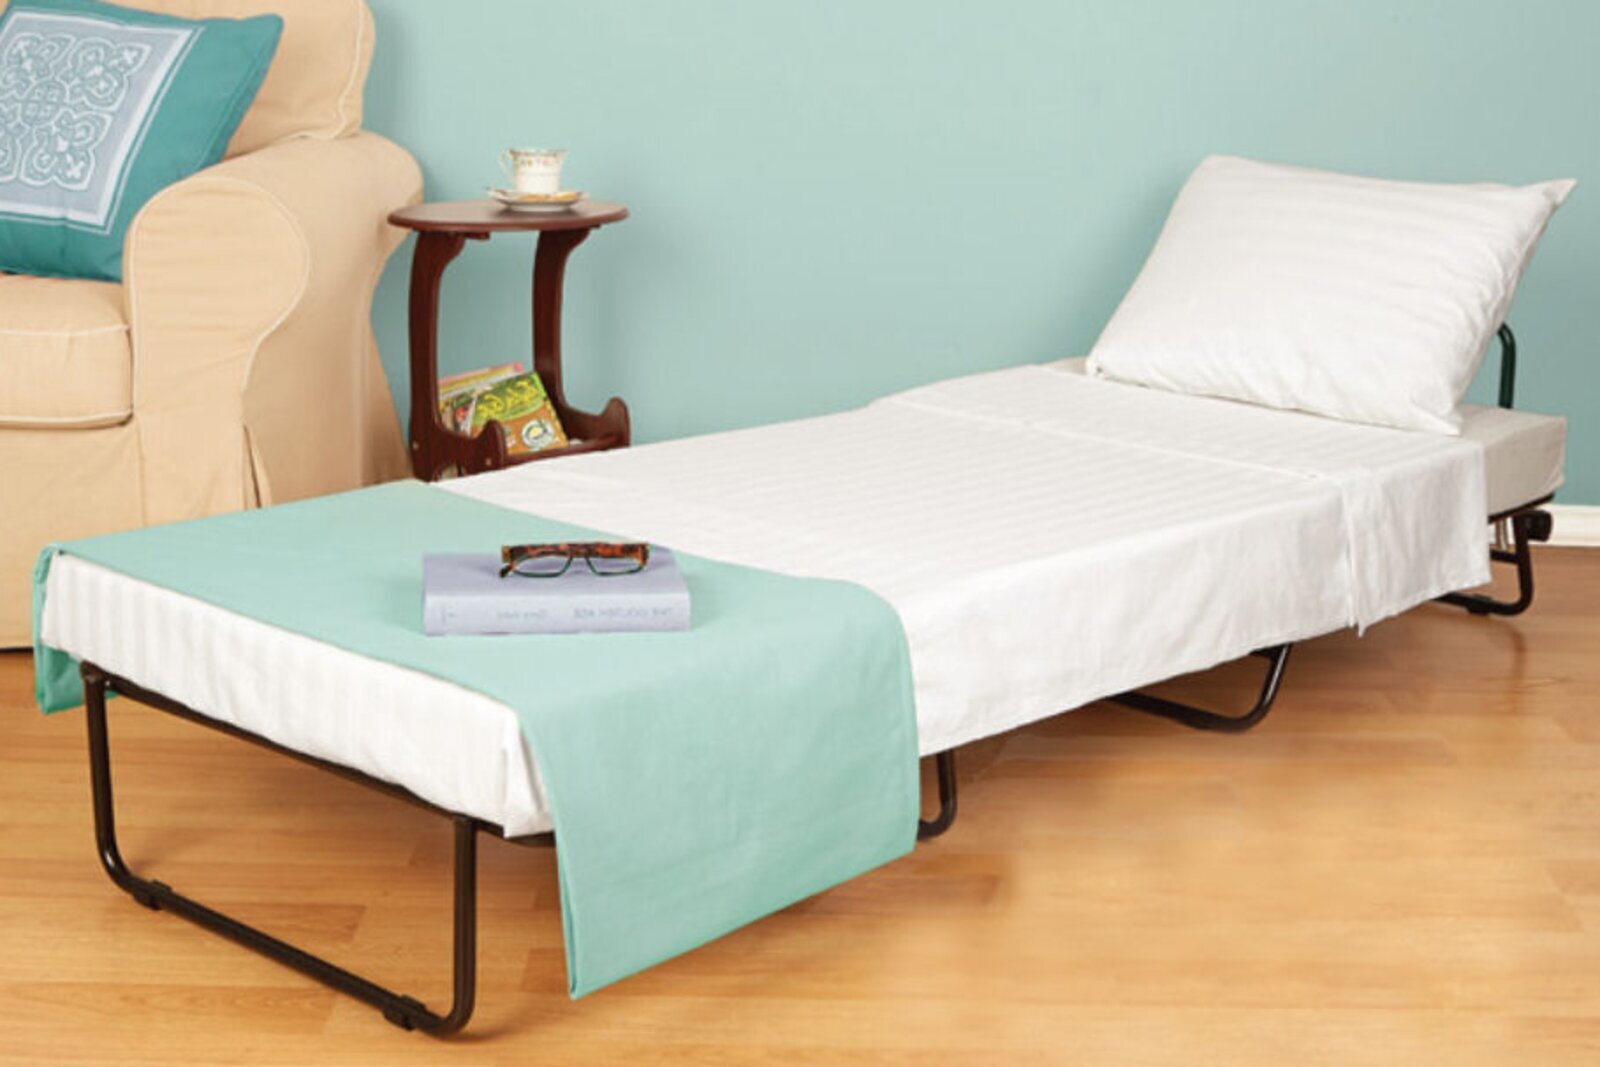 Functional Ottoman Bed